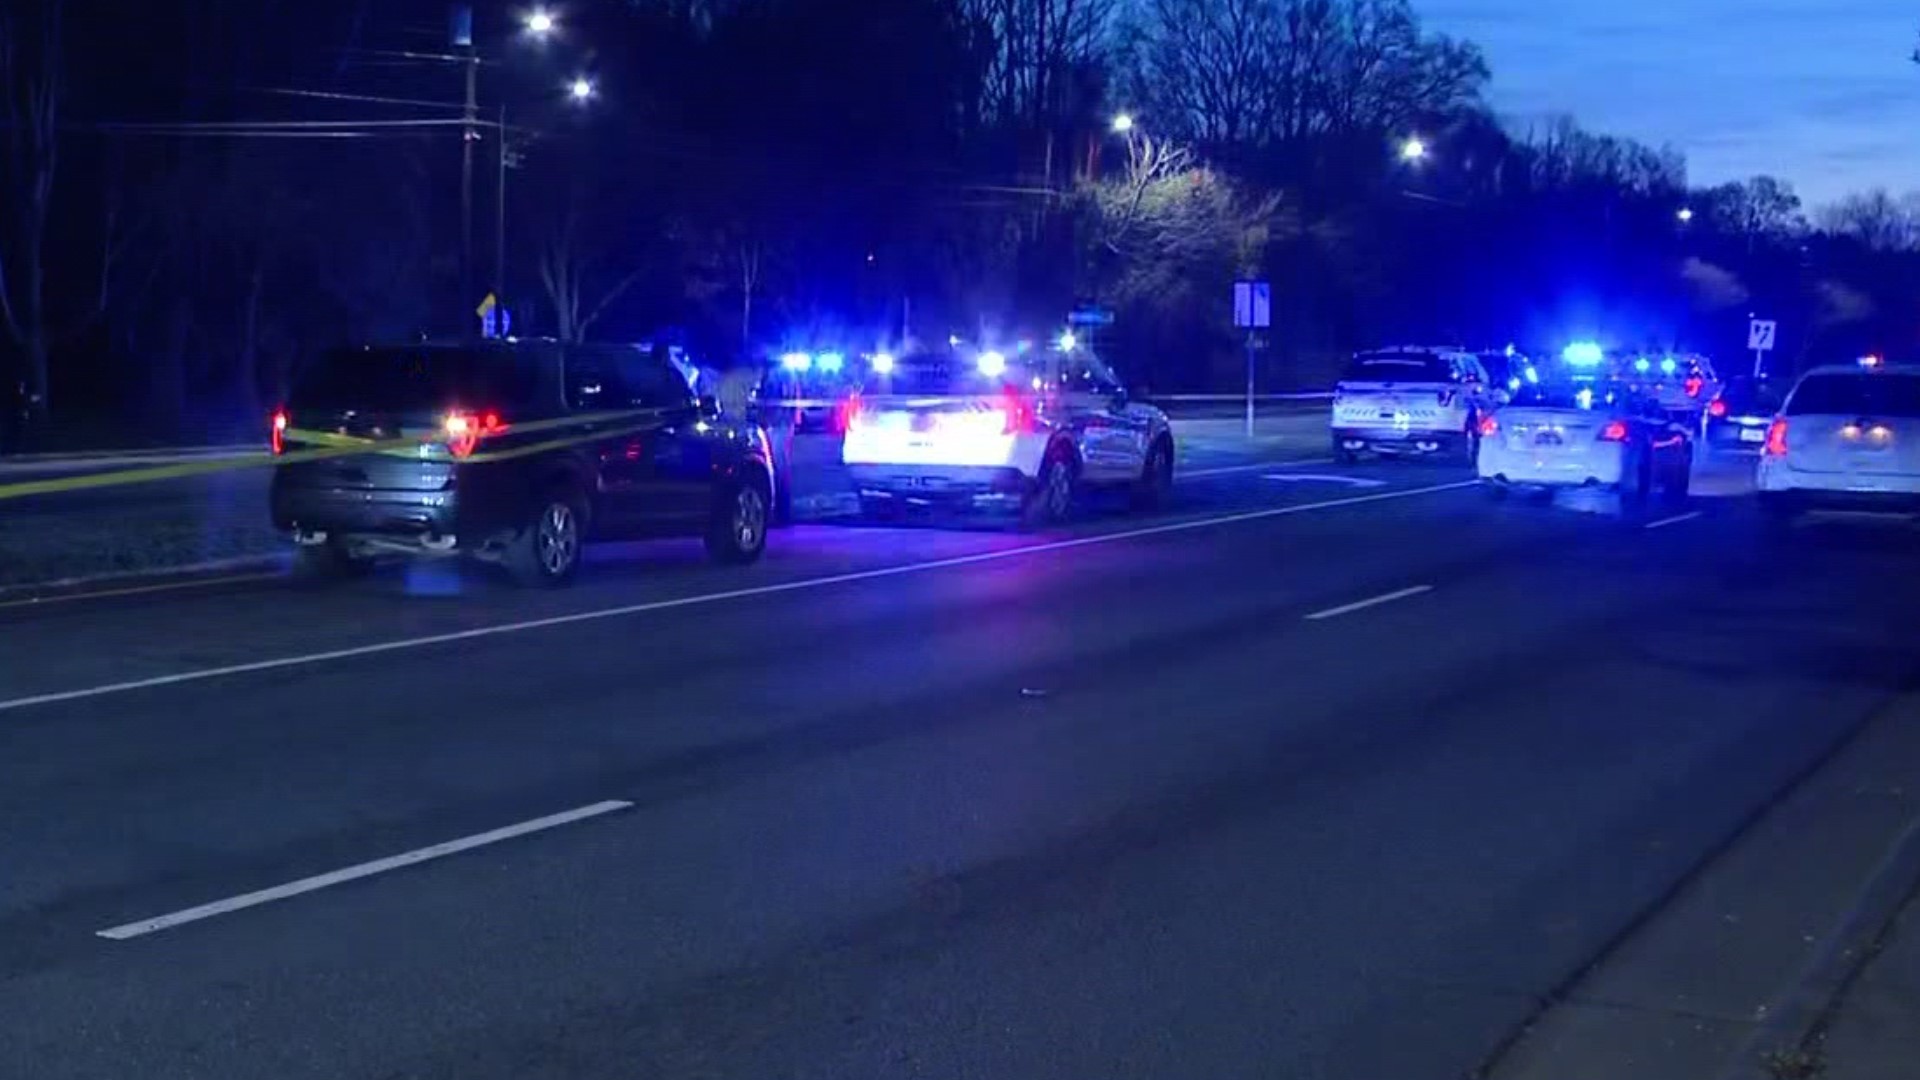 Police chase ends with serious crash into tree on Albemarle Road | wcnc.com